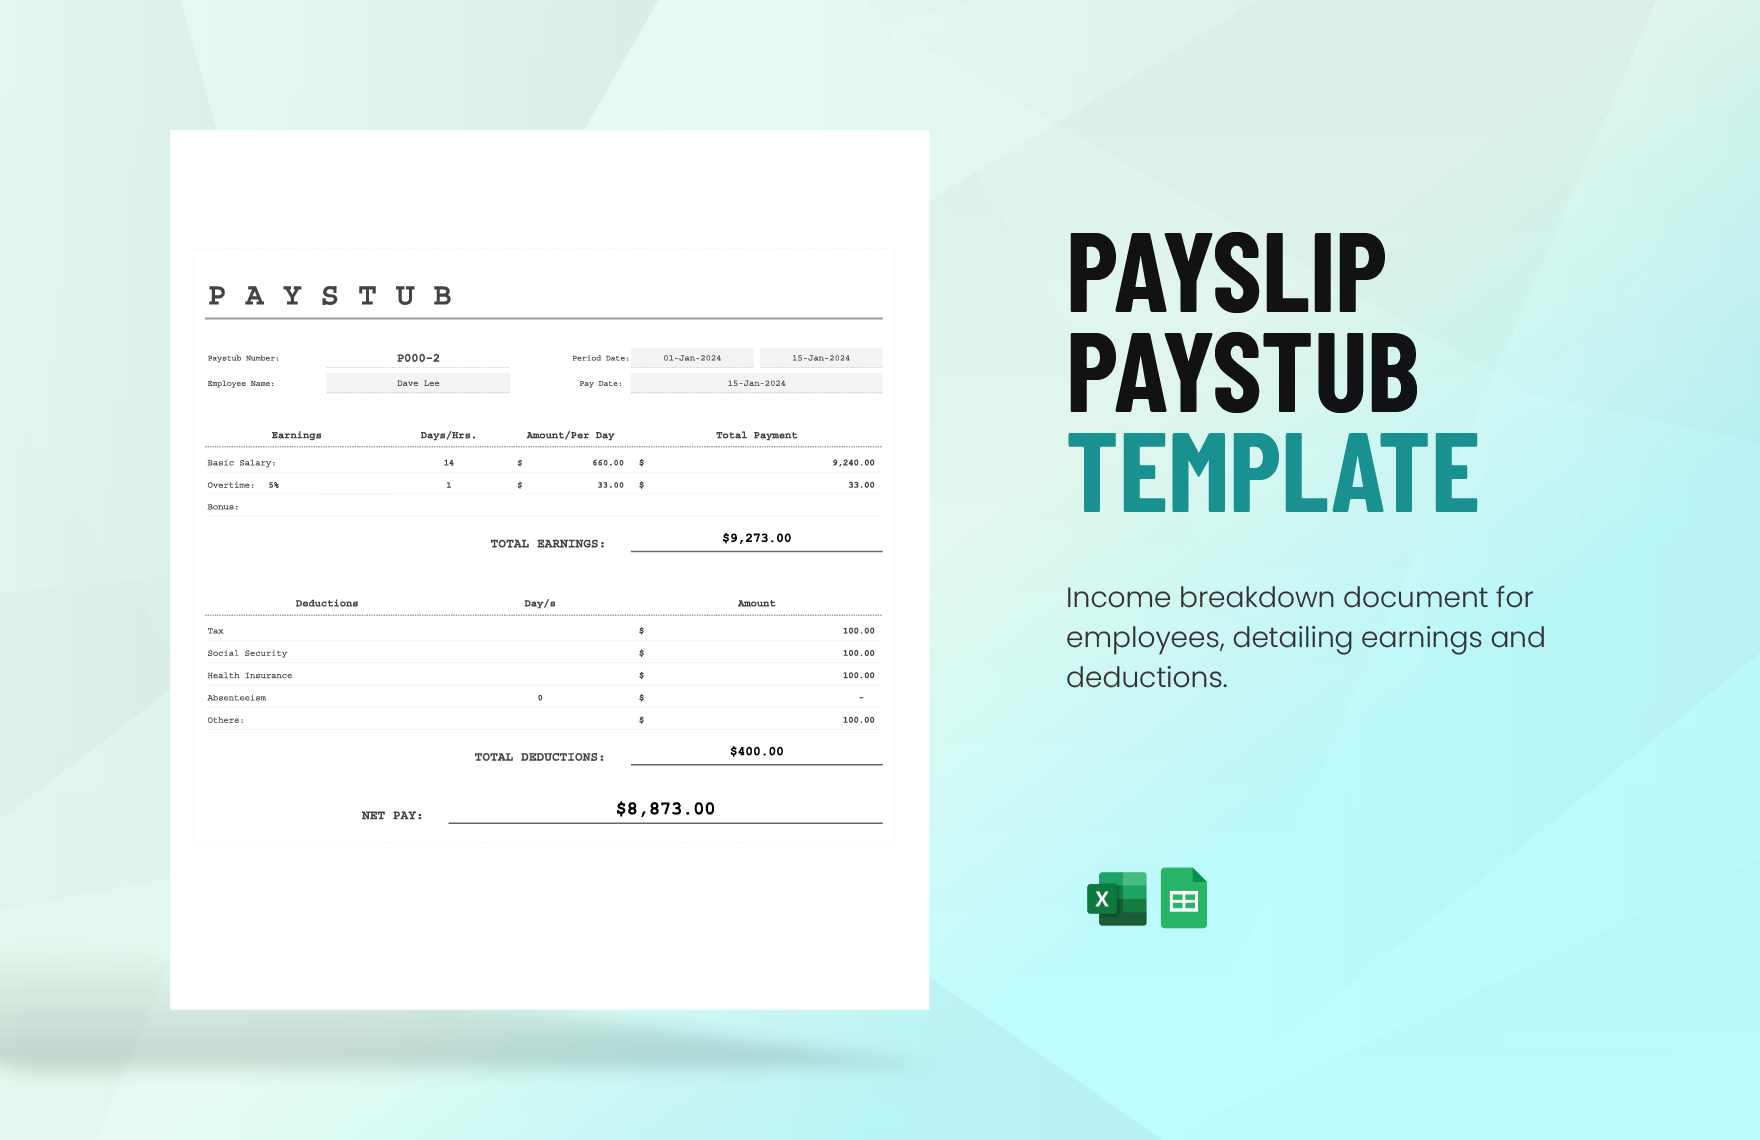 Payslip Paystub Template in Excel, Google Sheets